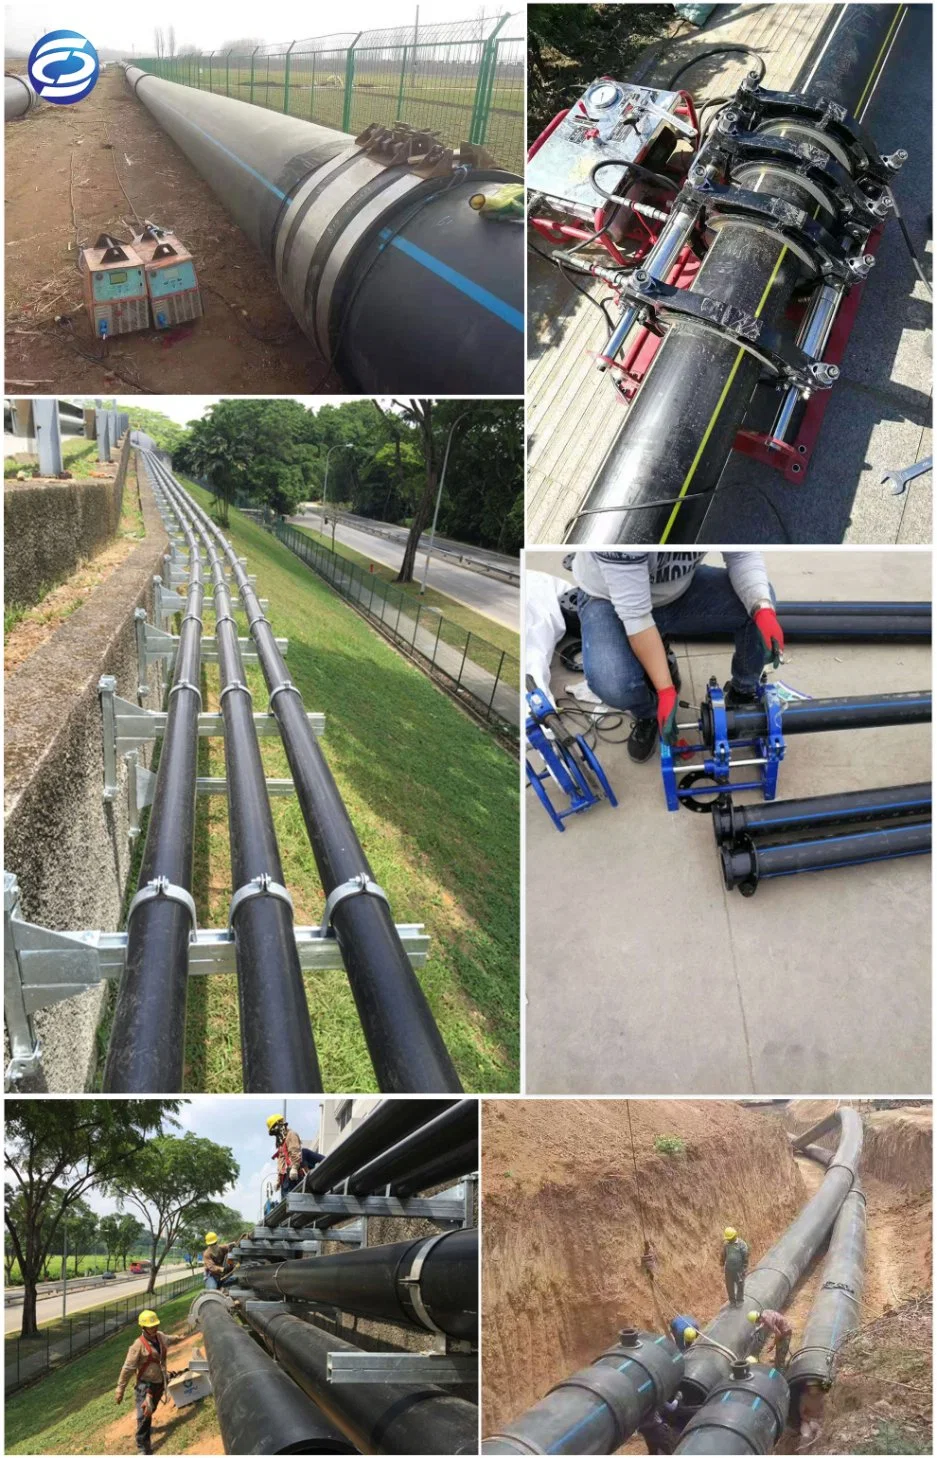 Low-Cost Potable Water Pipe Pn6 Pn8 Pn10 SDR 21 13.6 DN200 HDPE Pipe for Factory Water Delivery System